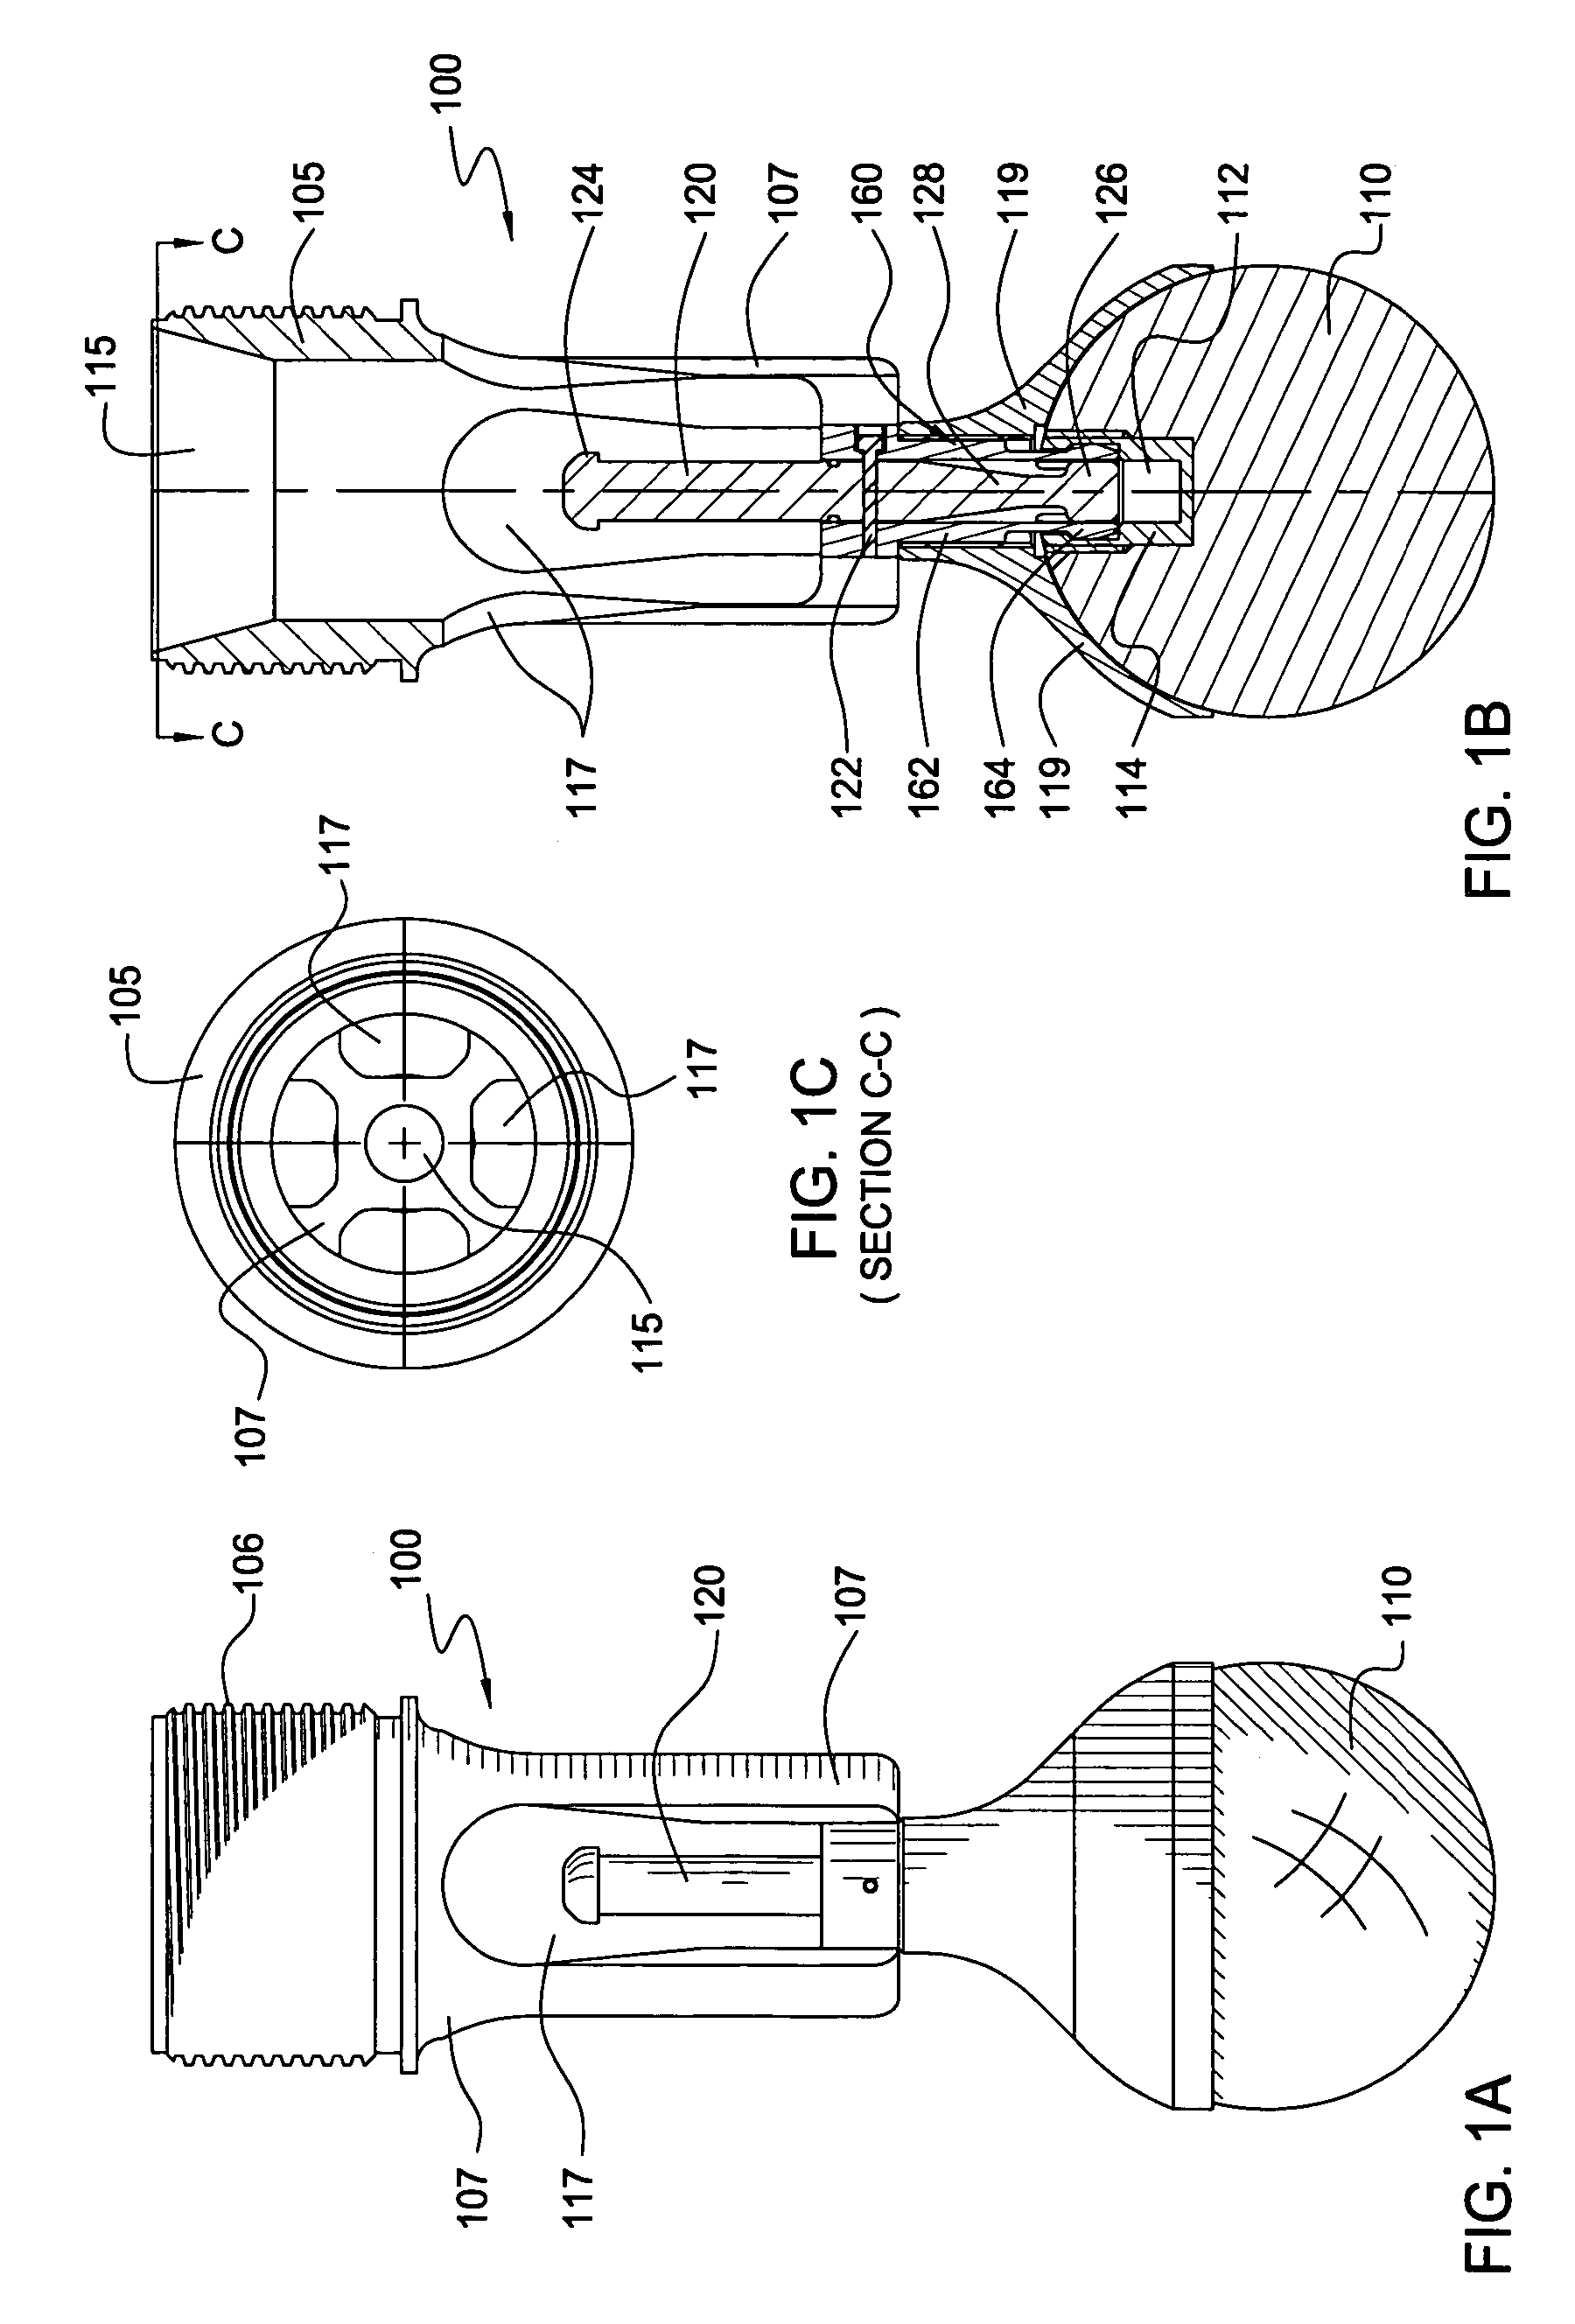 Apparatus for releasing a ball into a wellbore